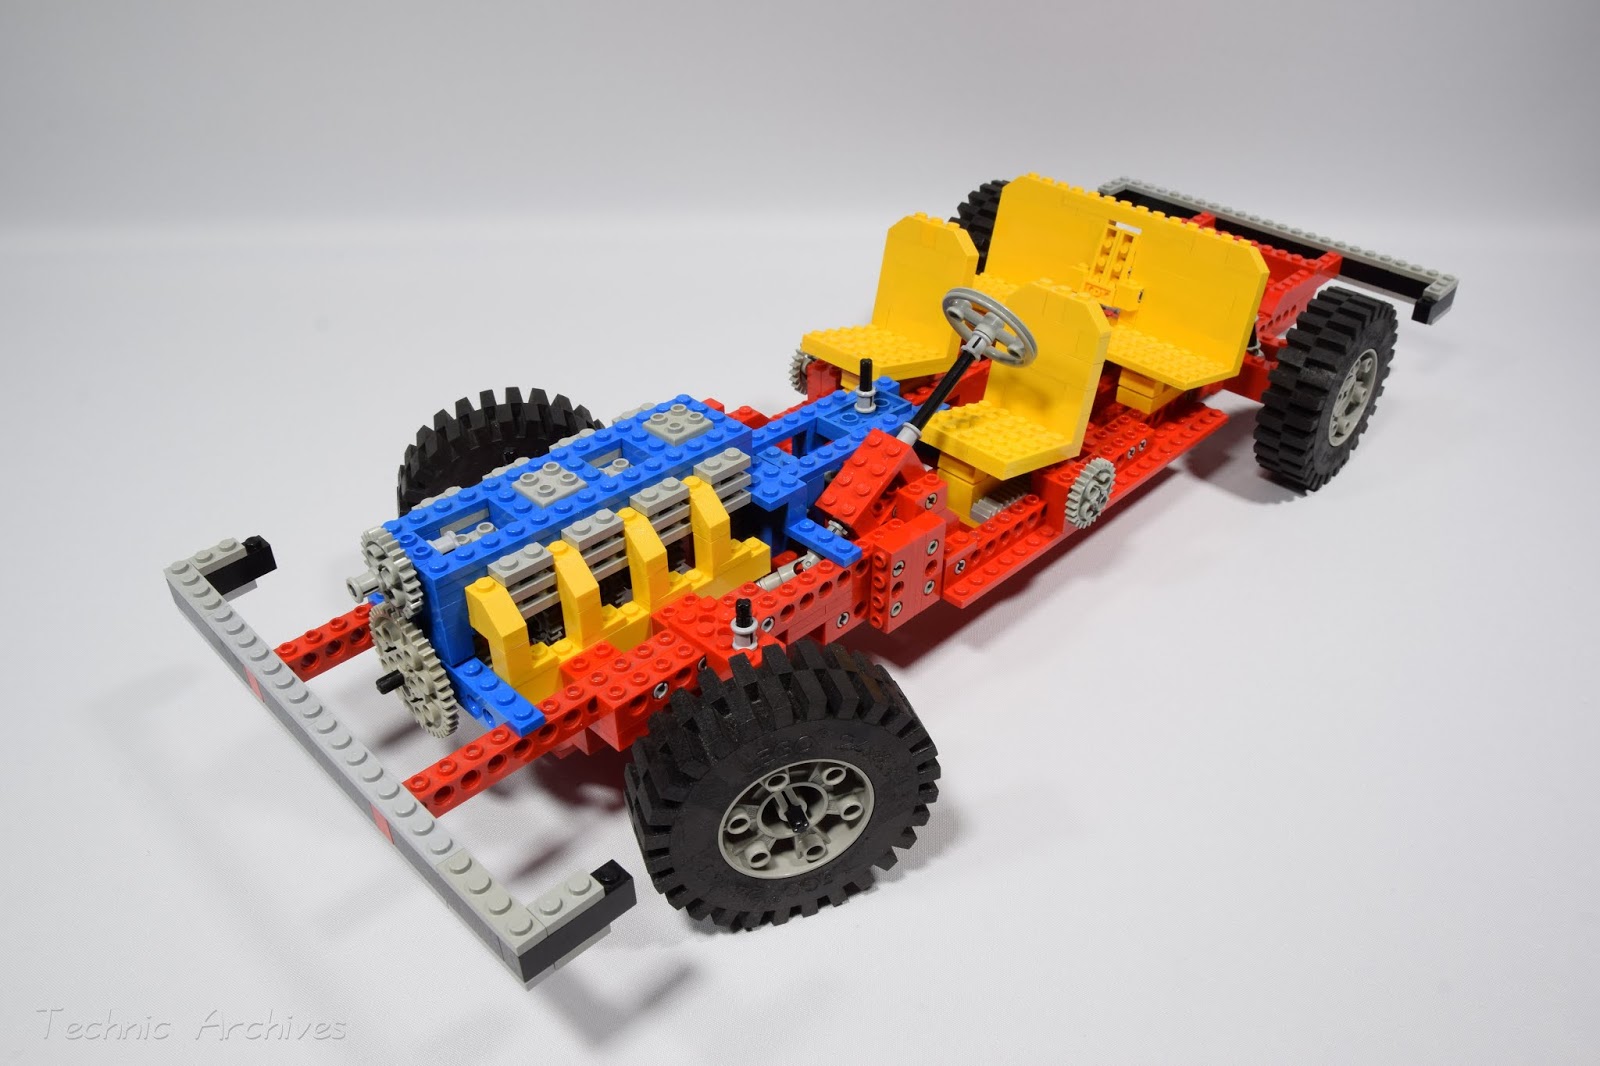 Technic 853 / 956 Auto Chassis - the very first Lego Technic